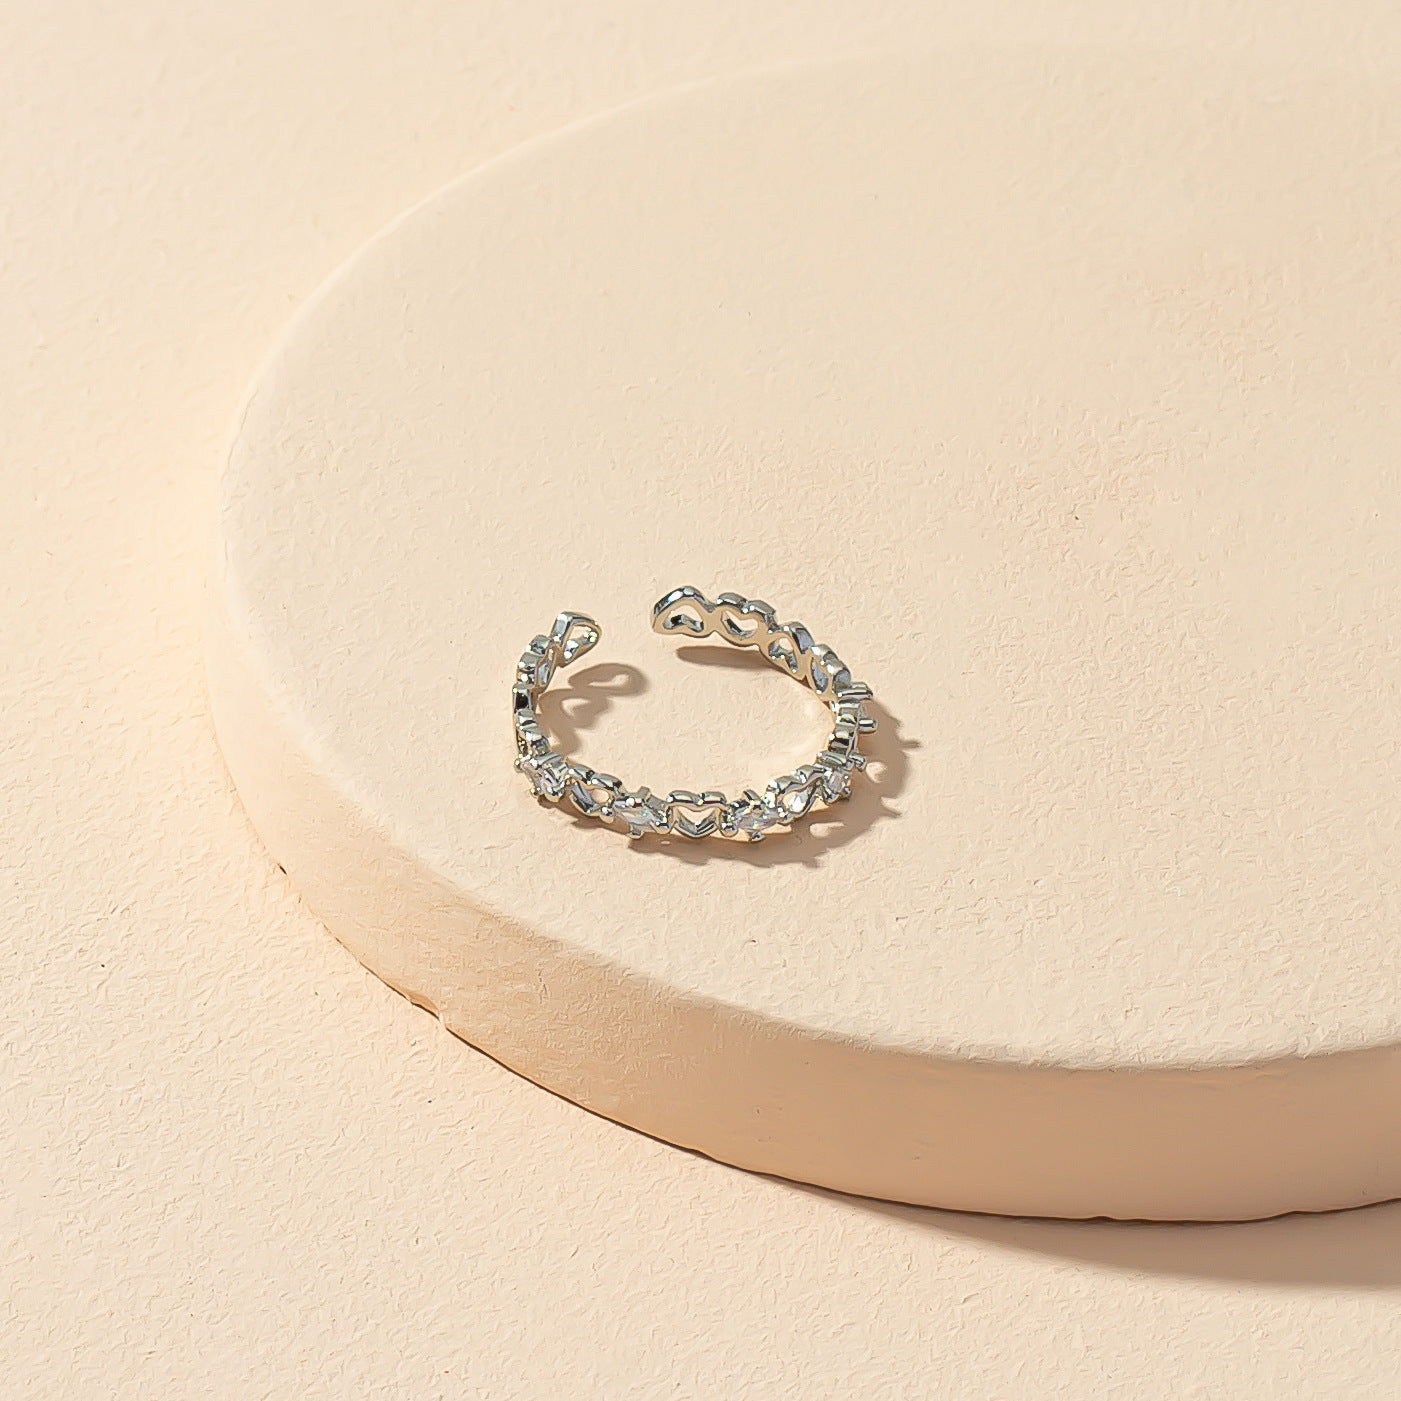 Heartfelt Elegance: Contemporary Heart Opening Ring with a Twist